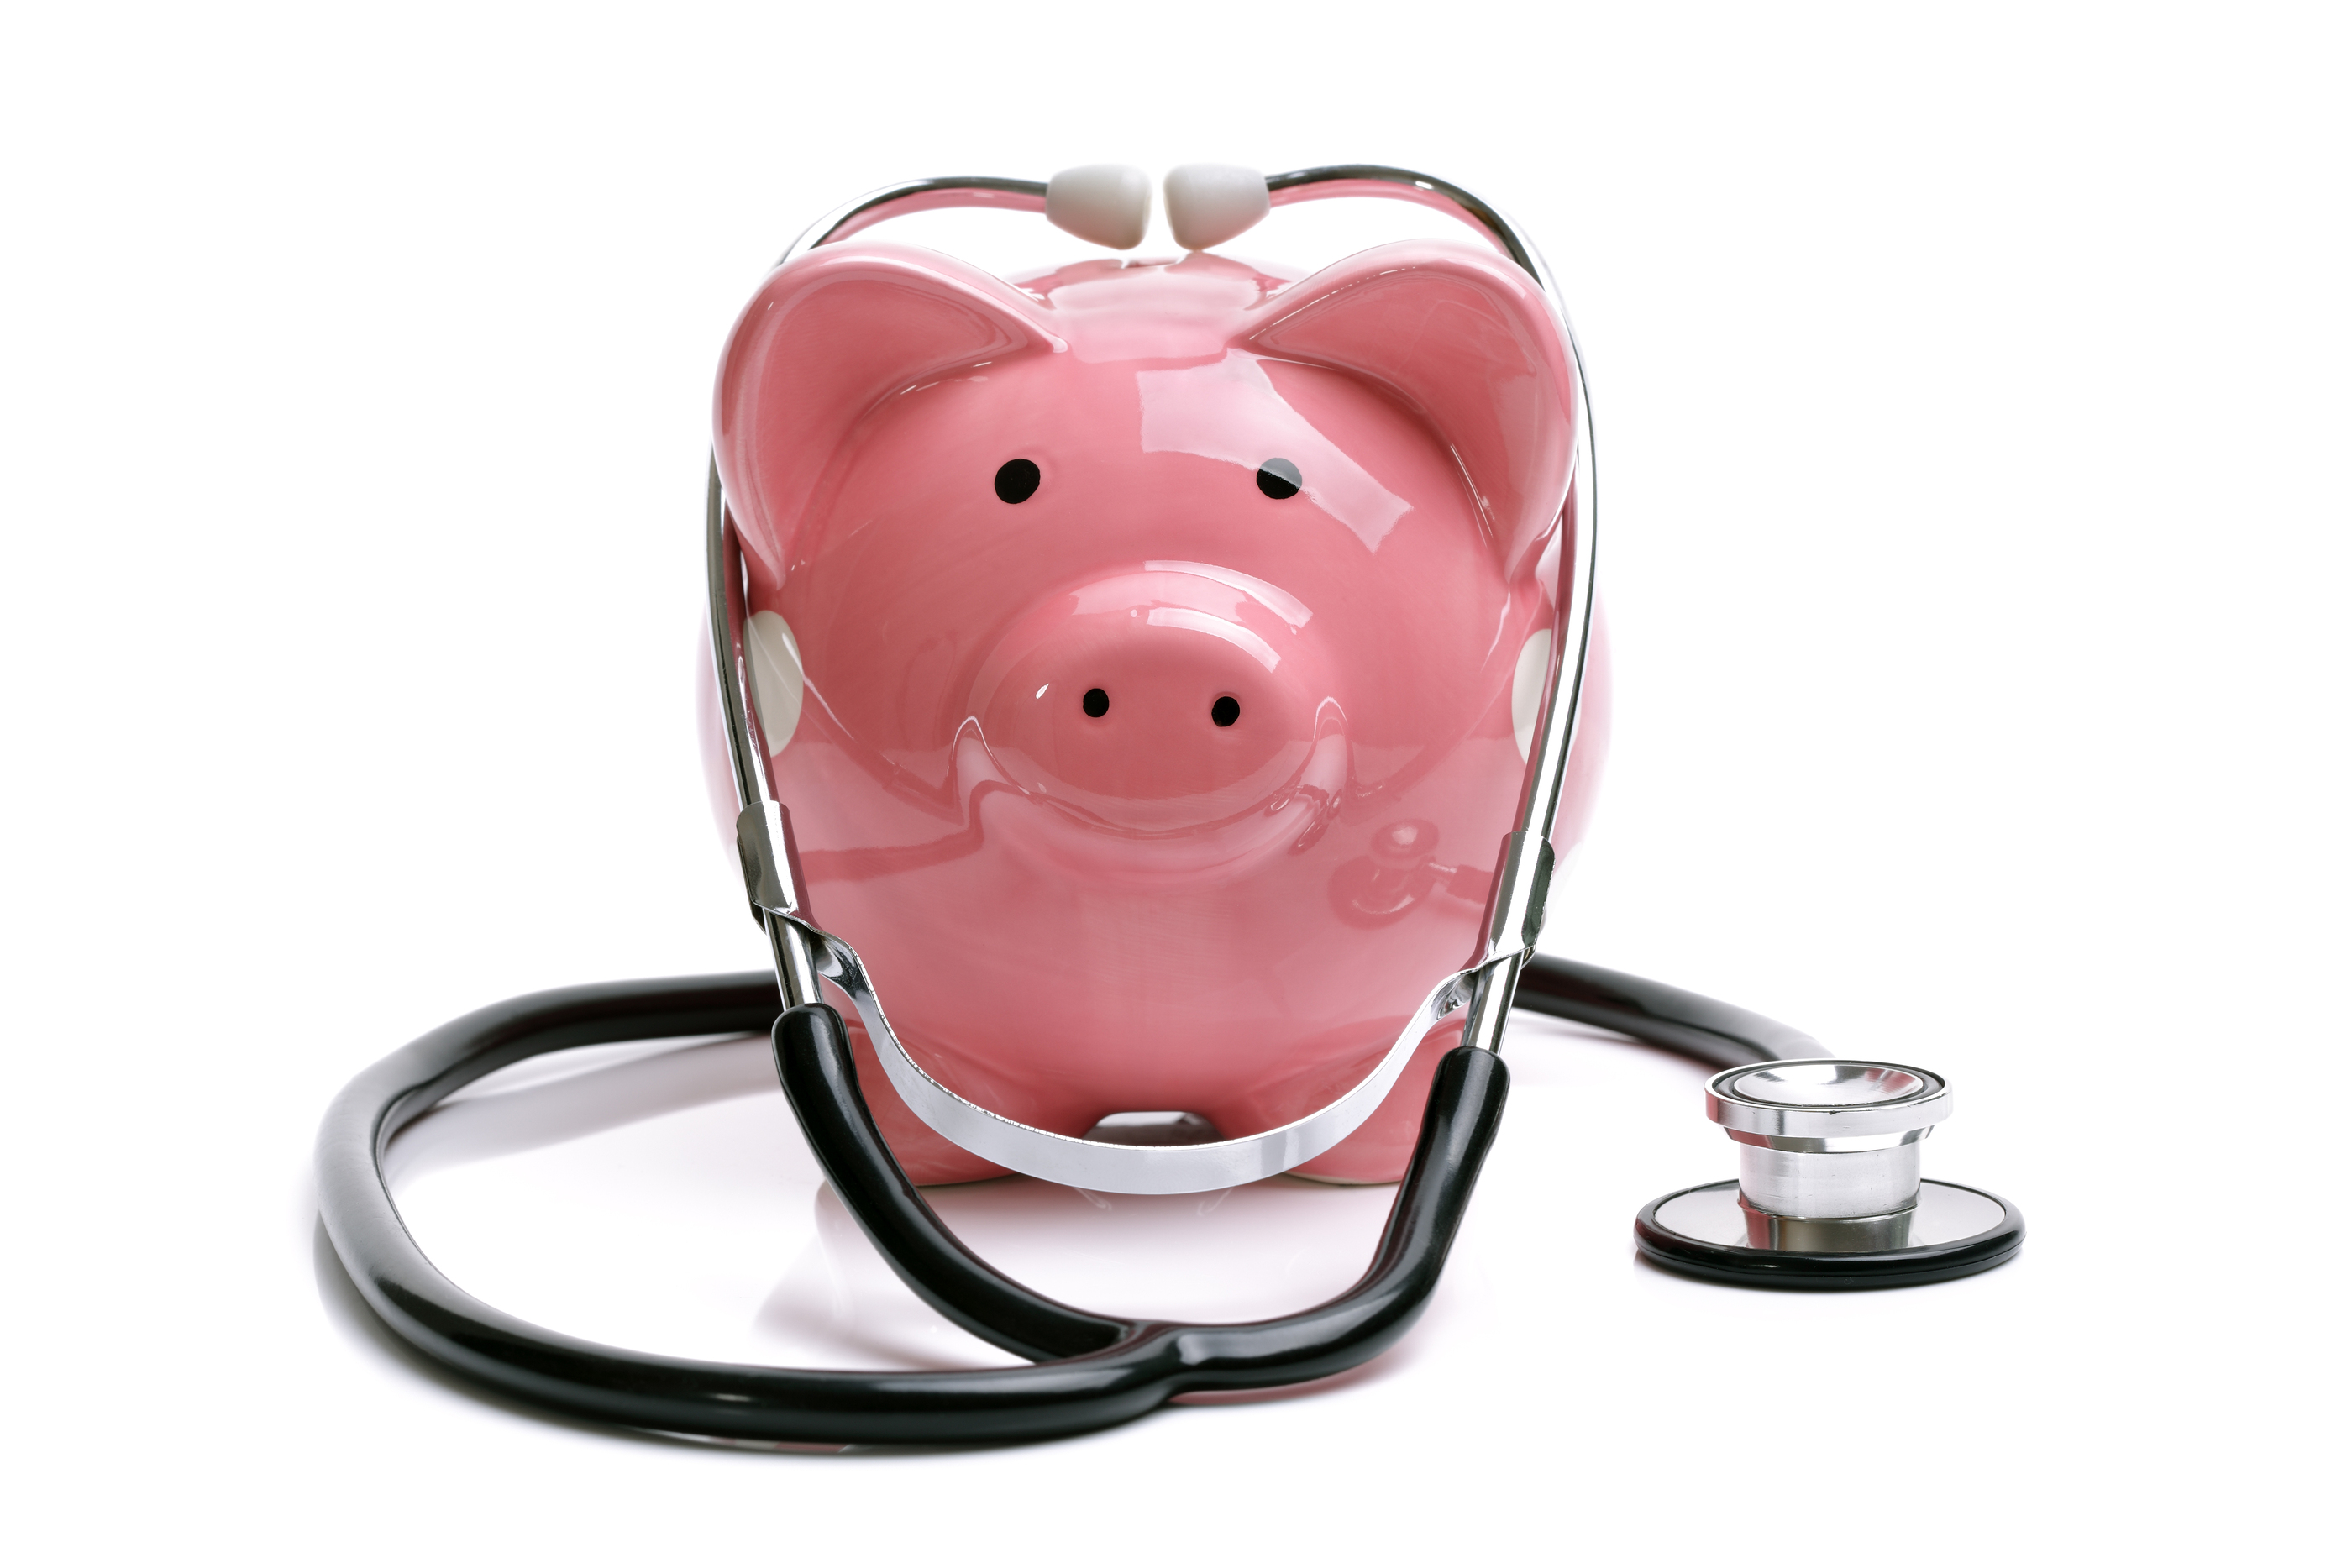 Make health expenses business deductible 